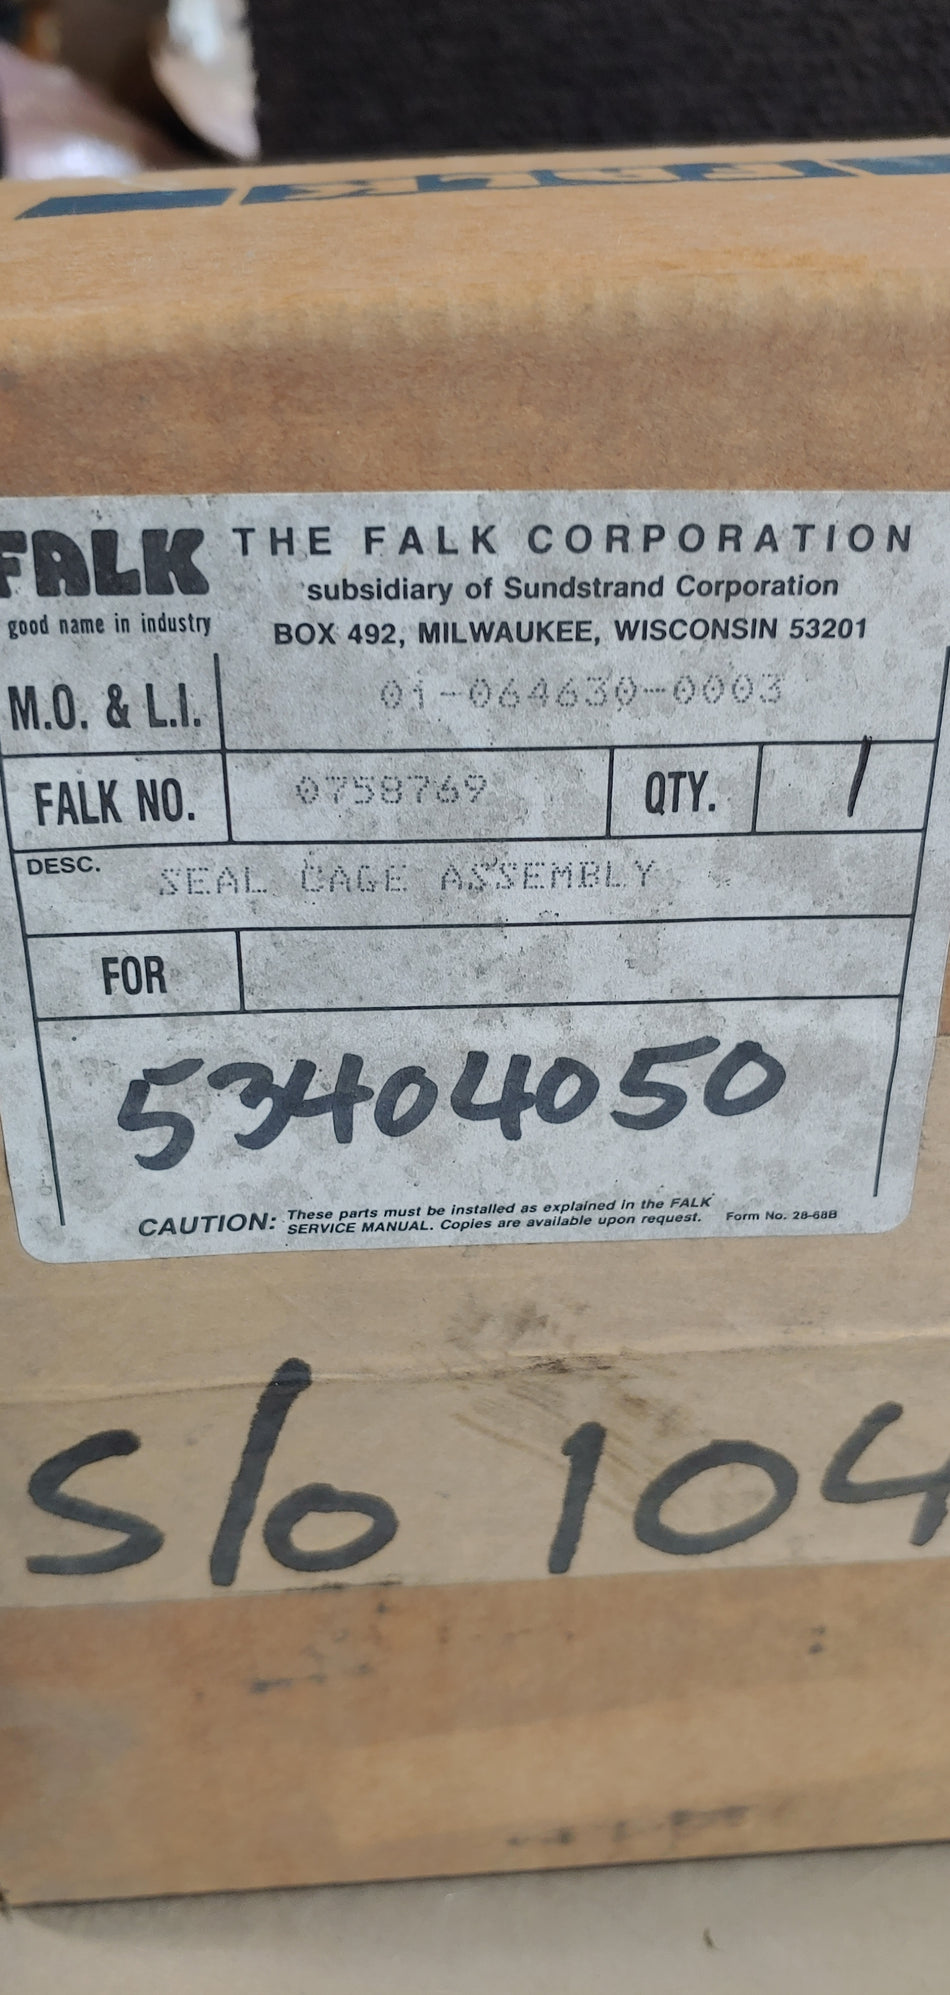 Falk Seal Cage Assembly 0758769